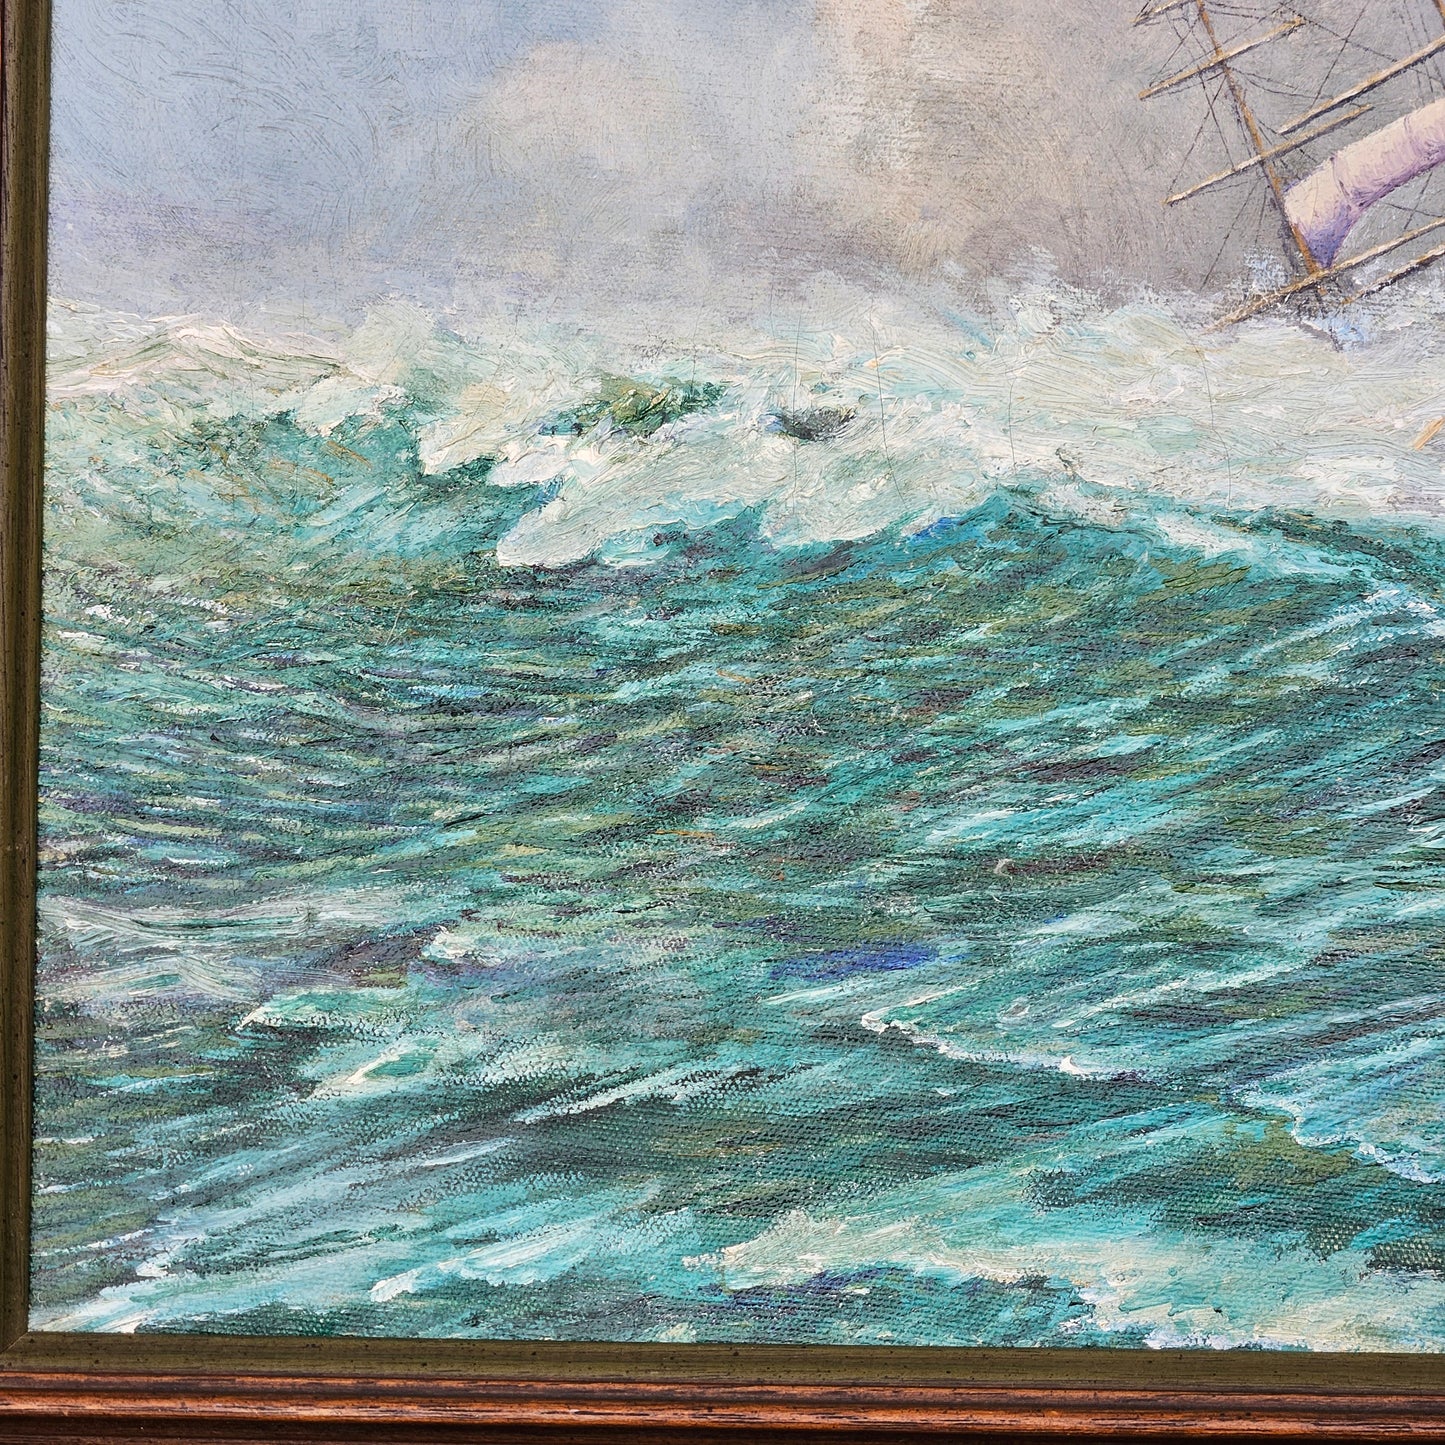 Vintage Signed Oil on Canvas Painting of Ship in Rough Seas - James McGarrigle